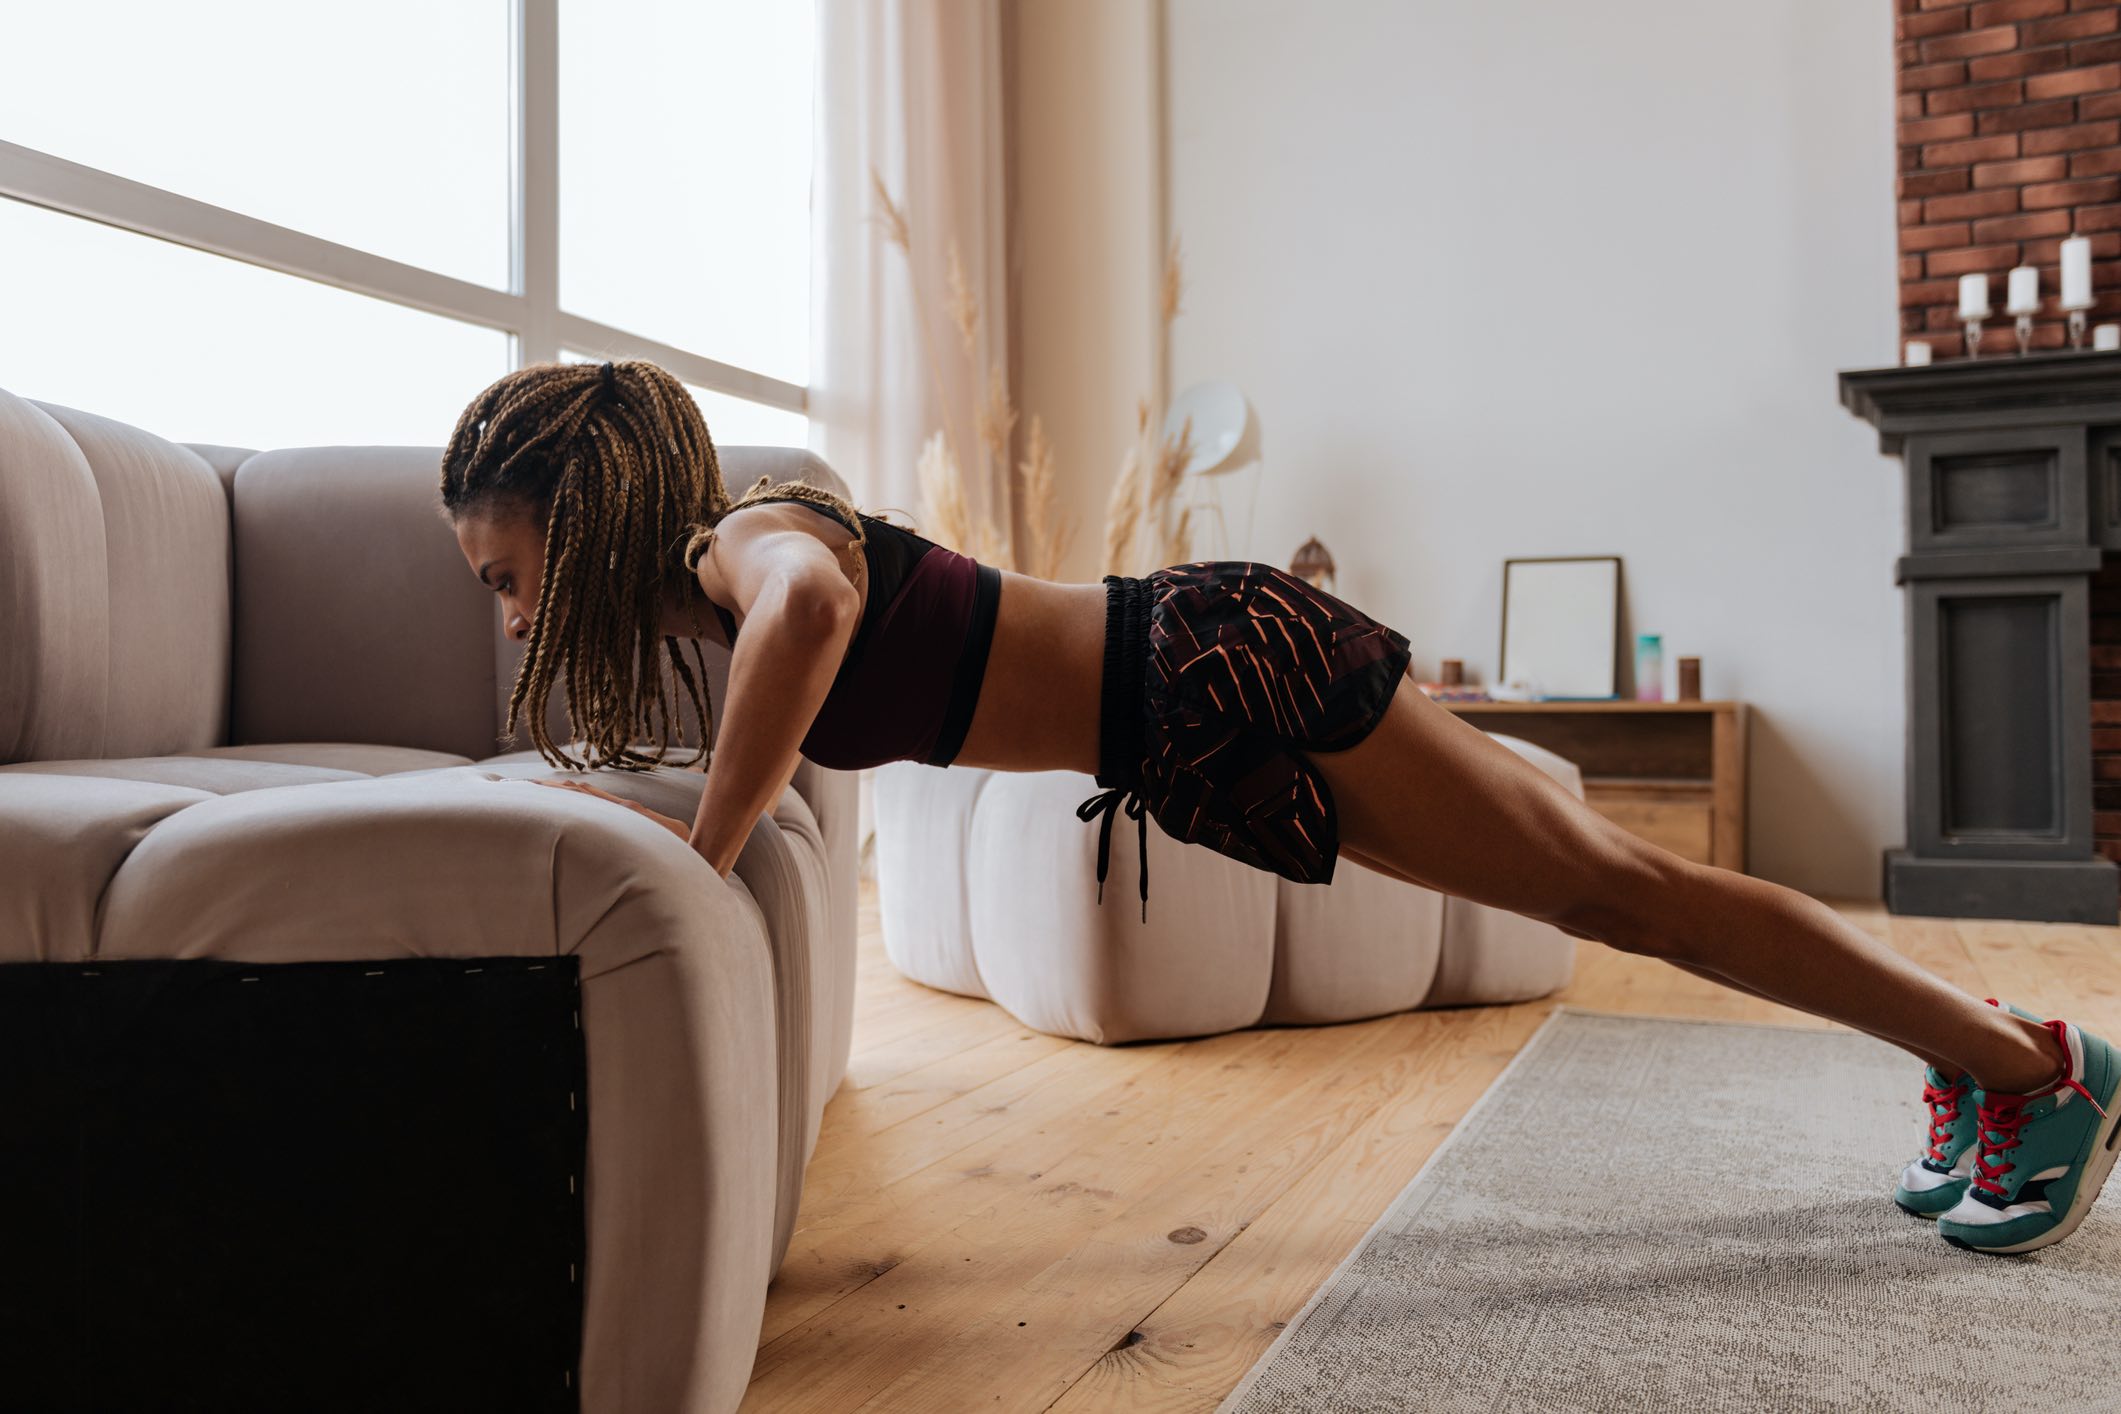 10 Things To Do When You’re Stuck At Home Fun At-Home Workouts To Keep You Mentally and Physically Fit